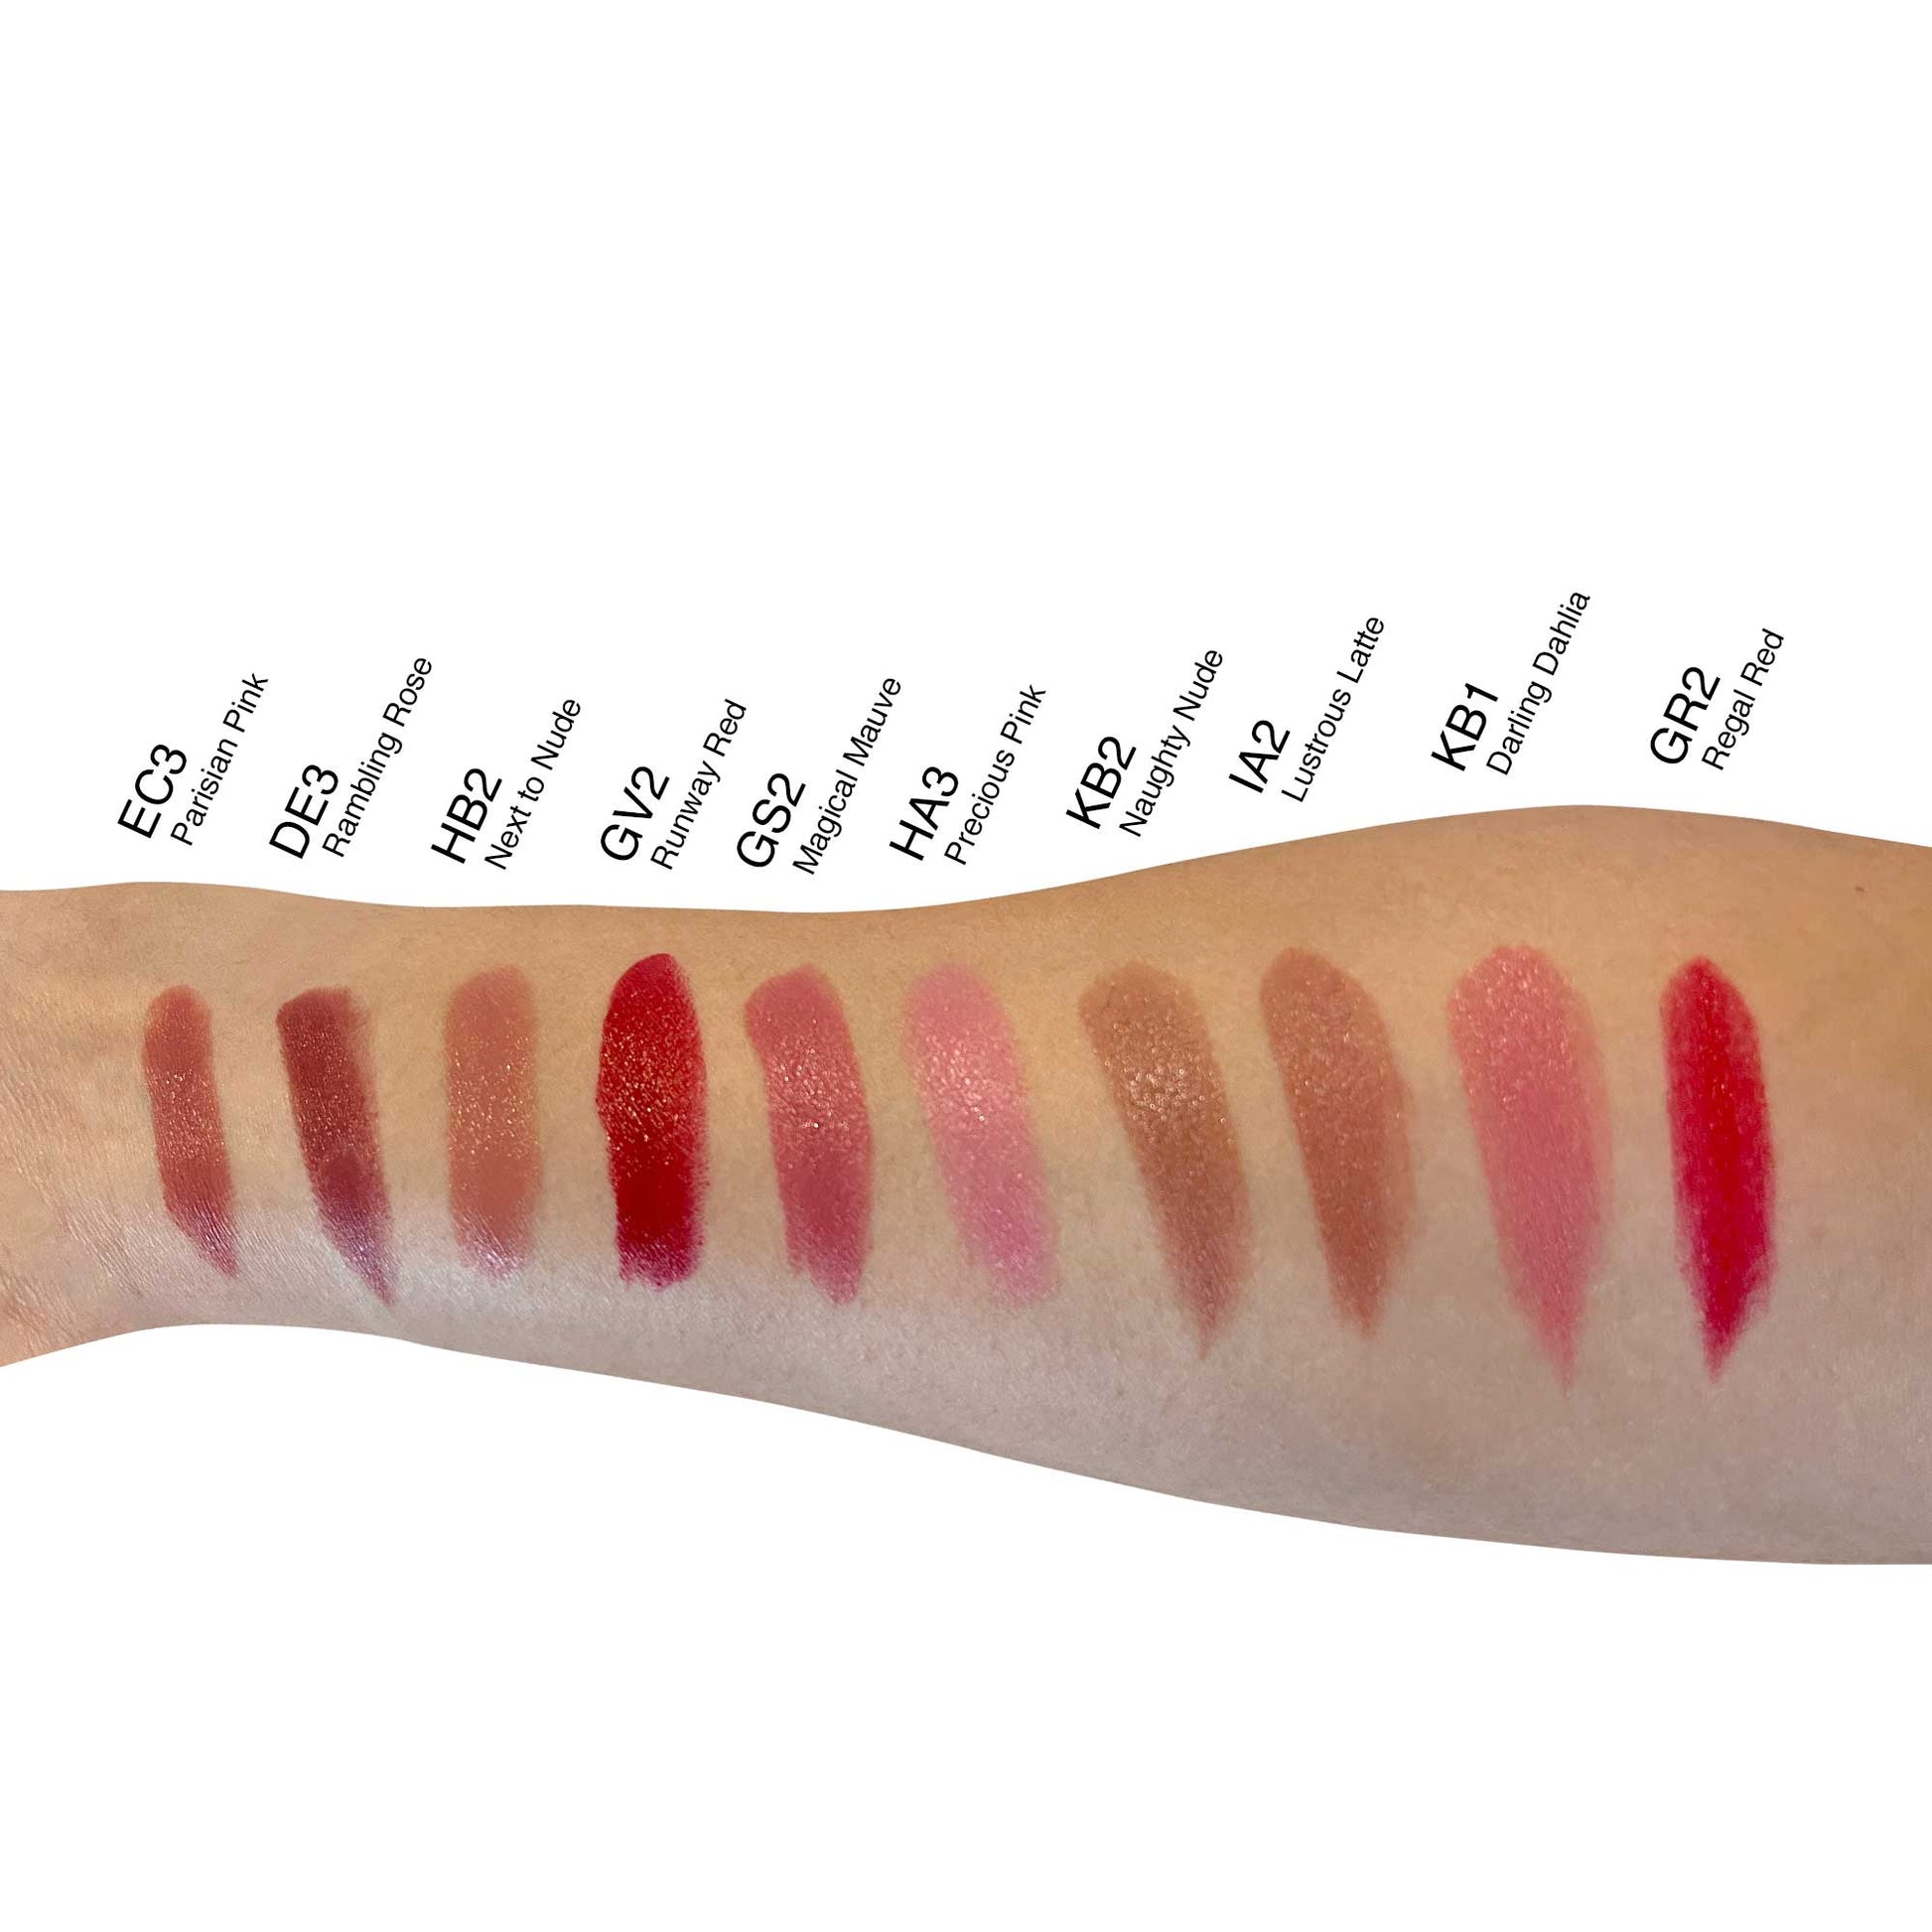 Discover pink shades for your lips with Cruisin Organics' Rambling Rose Lipstick.